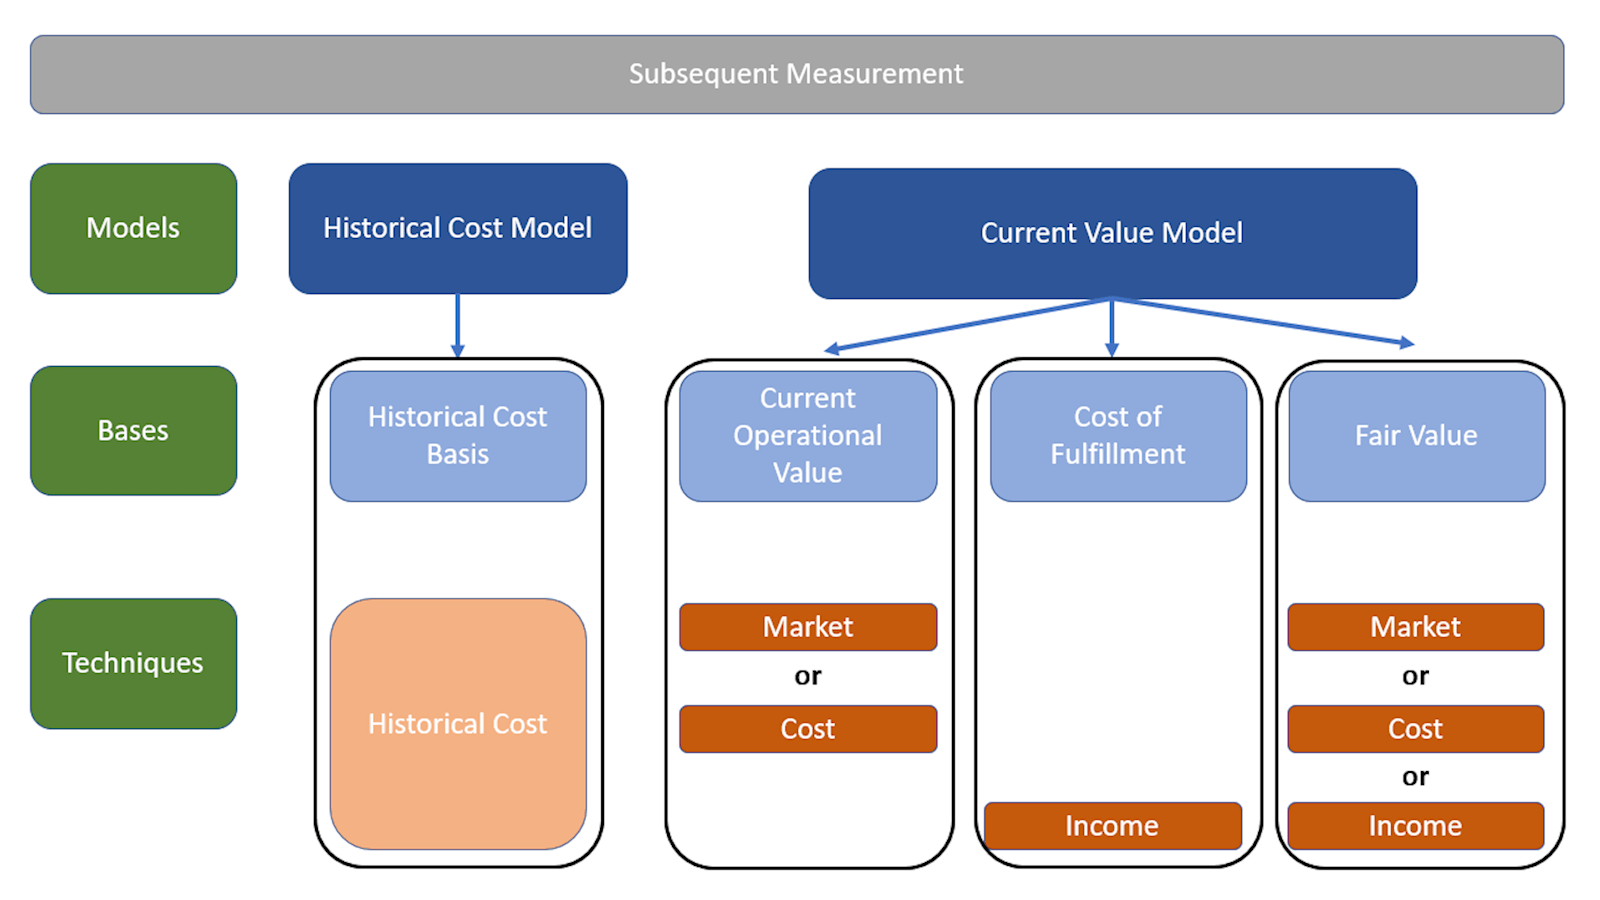 Overview of the measurement models, bases and techniques which are included in IPSASB’s measurement consultation paper. 